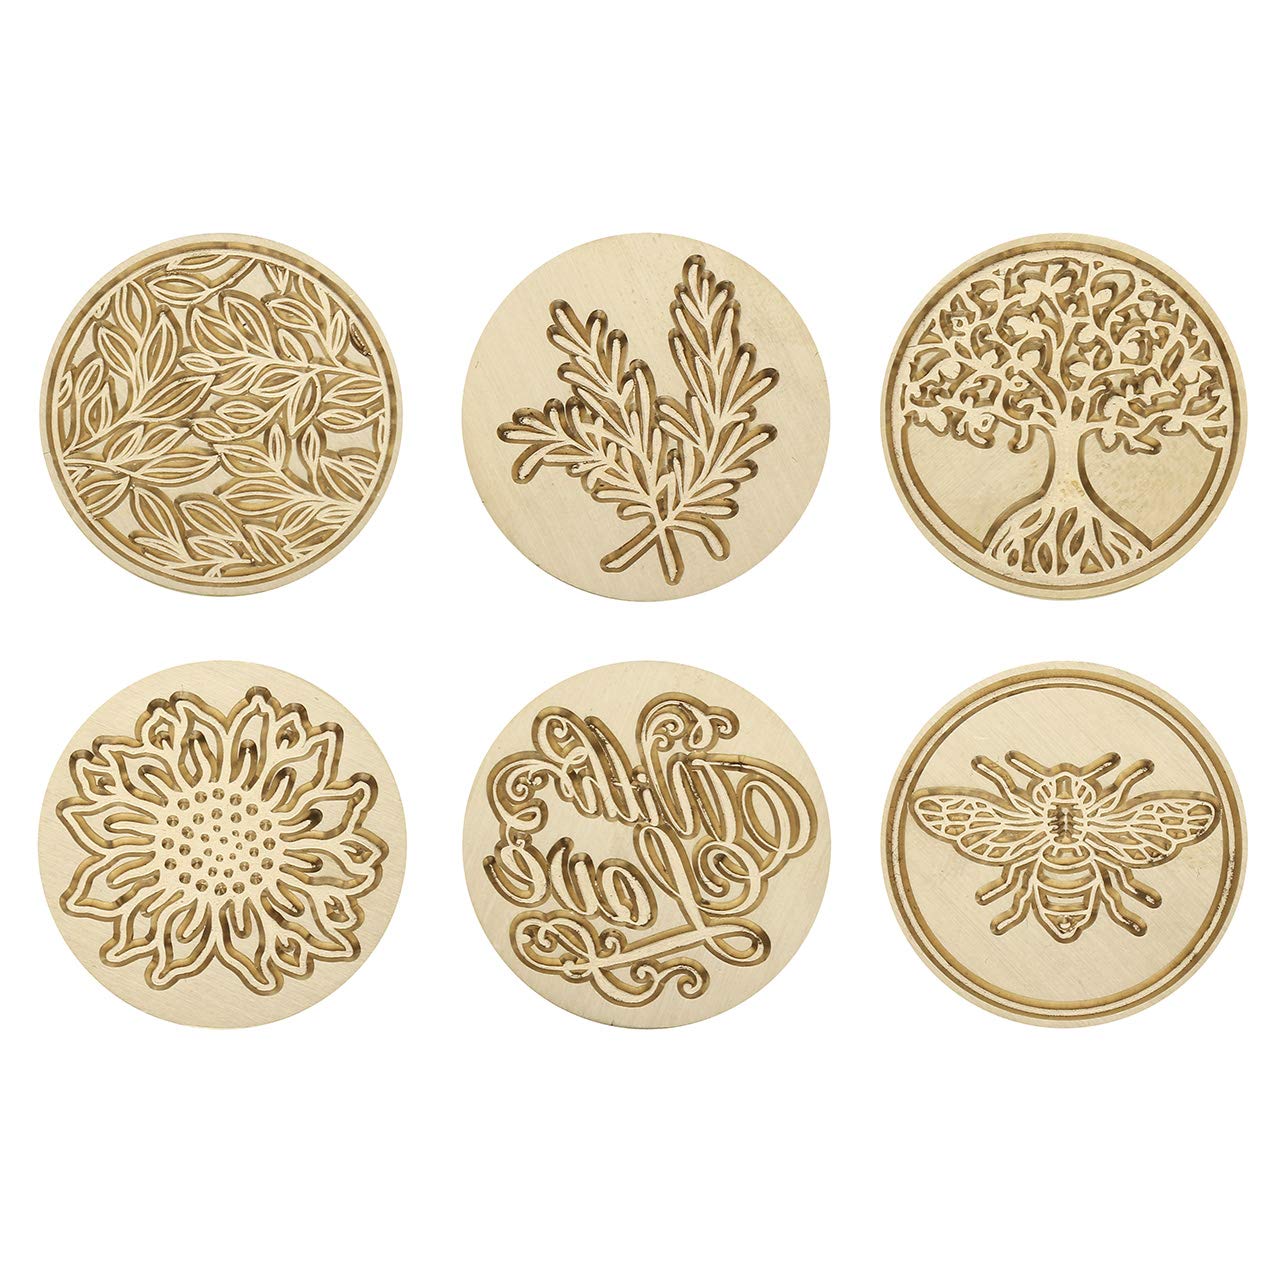 Wax Seal Stamp Set,Yoption 6 Pieces Plant Series Sealing Wax Stamp Heads + 1 Wooden Hilt, Vintage Seal Wax Stamp Kit with Gift Box (Sunflower+Tree of Life+Bee+with Love+Rosemary+Leaves)